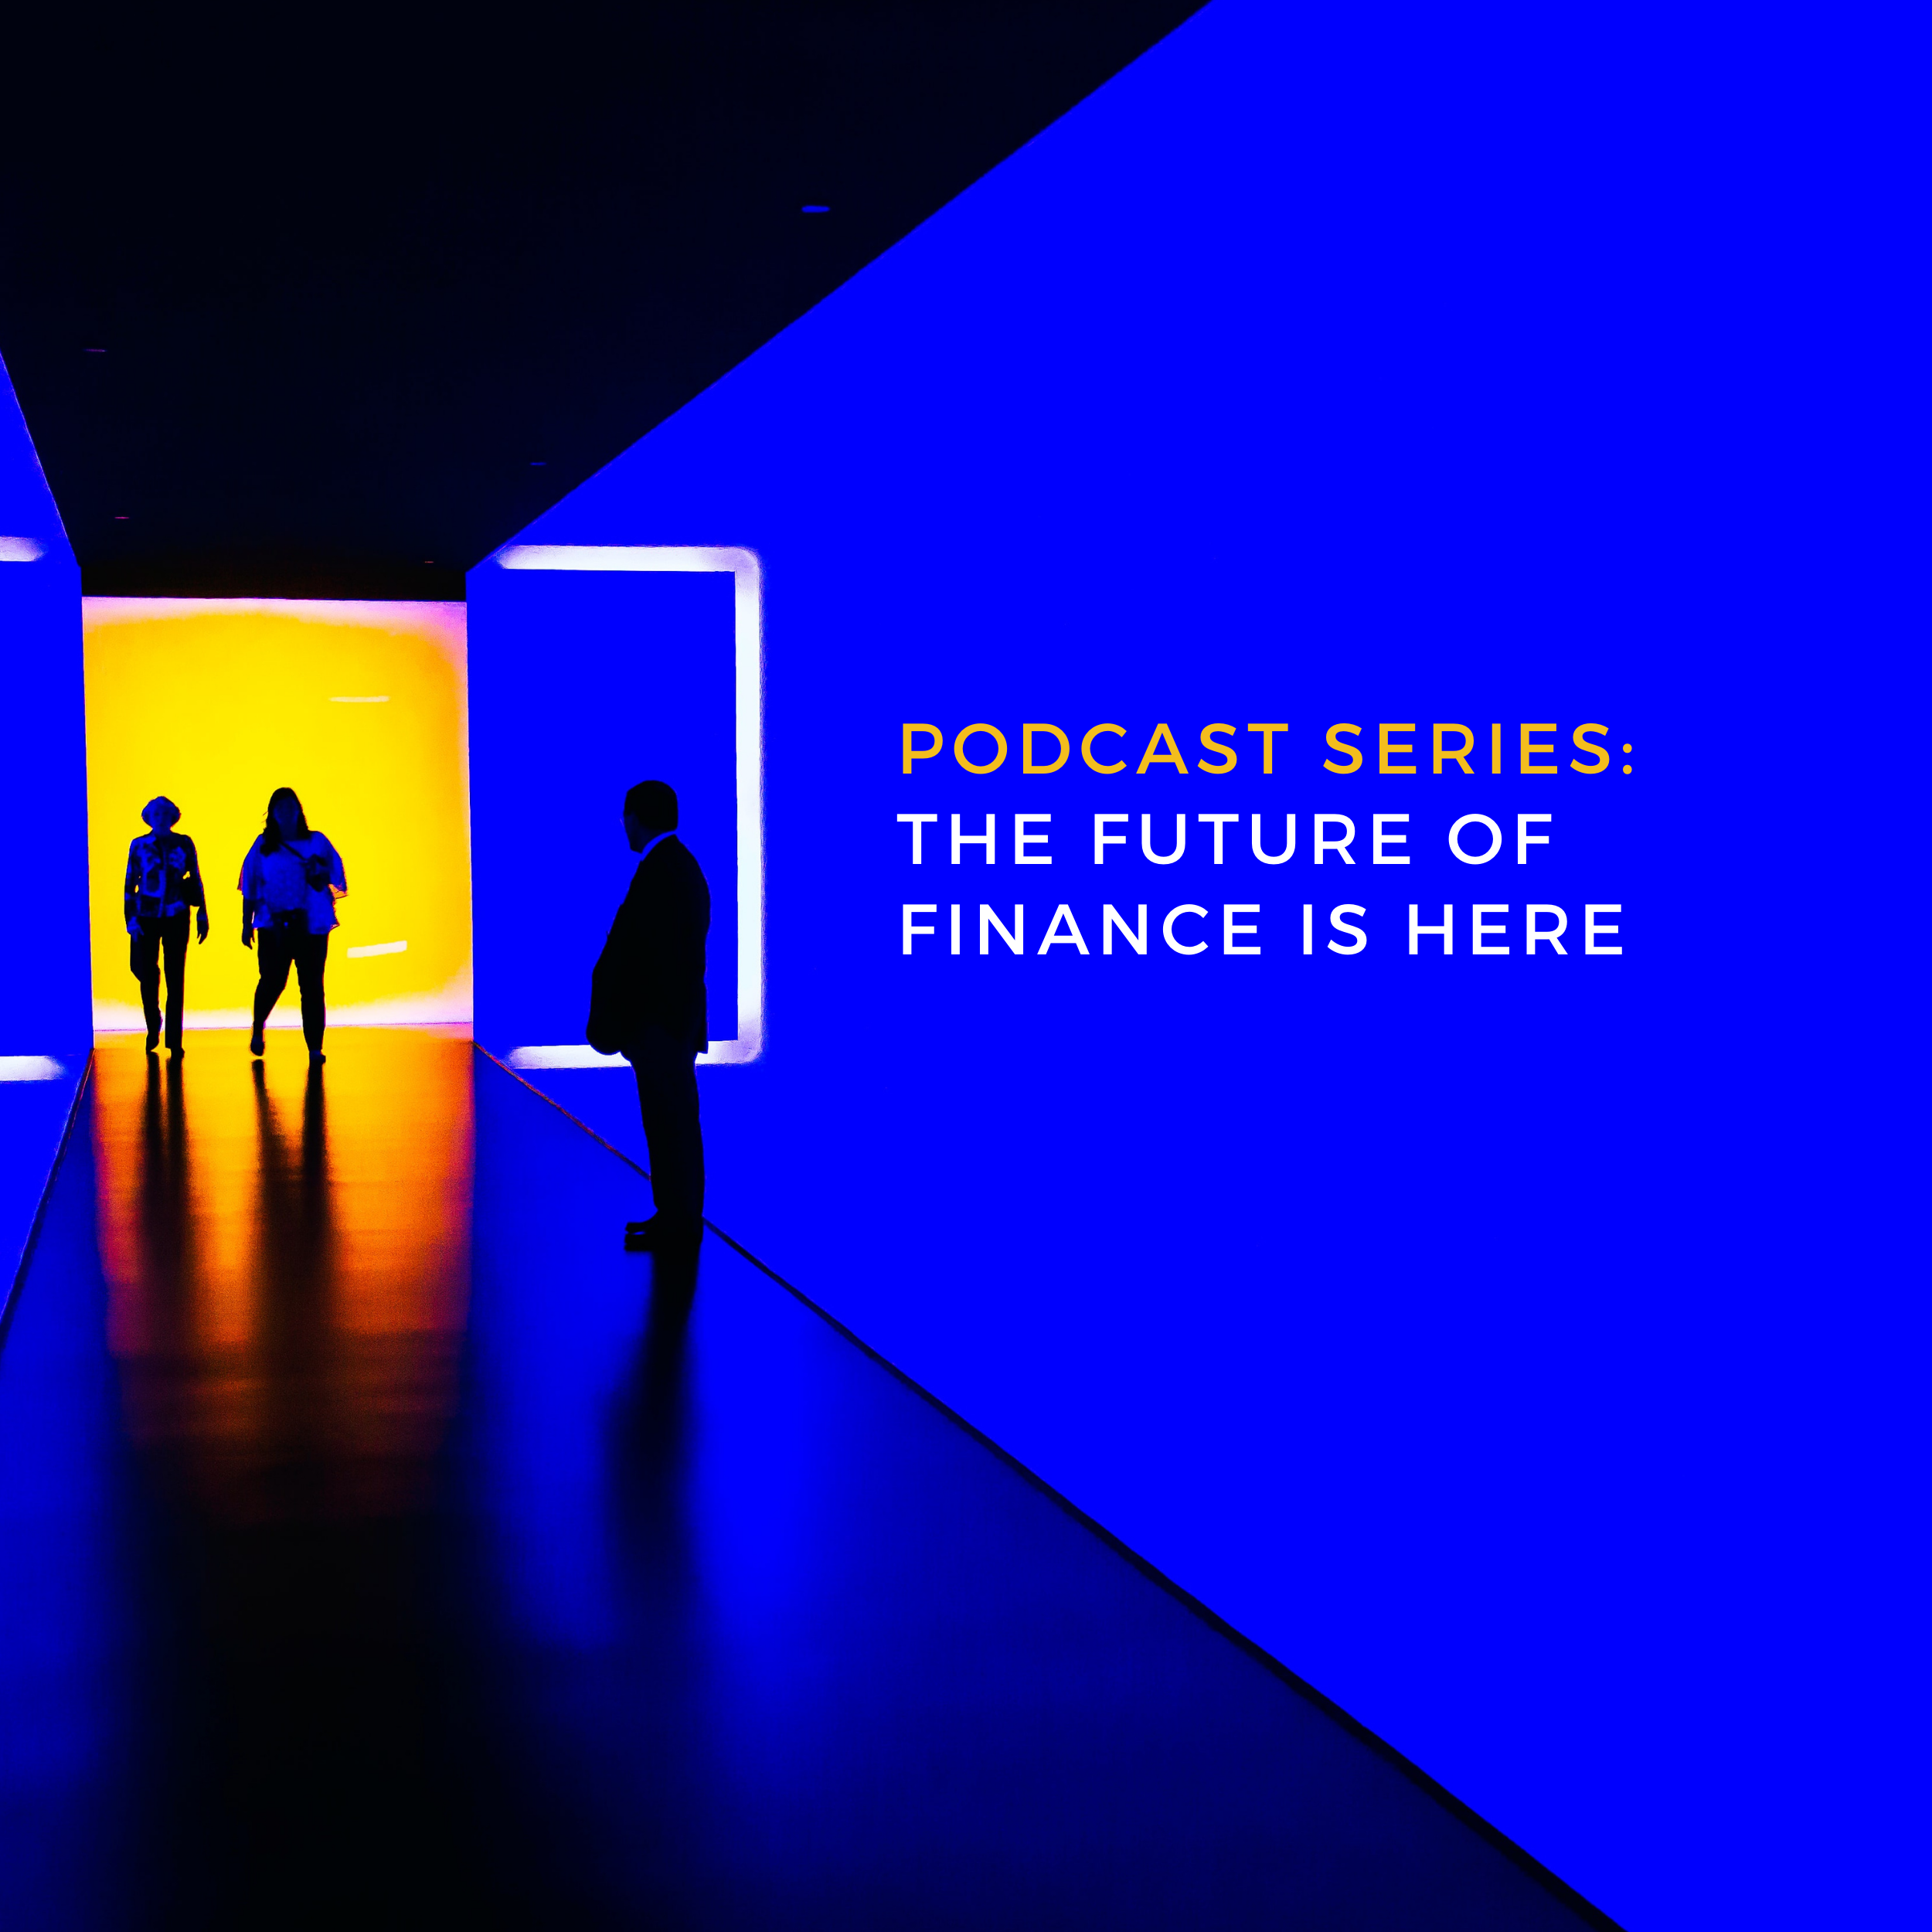 Episode 1.3 - Joseph Healy and James Boyle reveal 'what taking on the big banks really means'